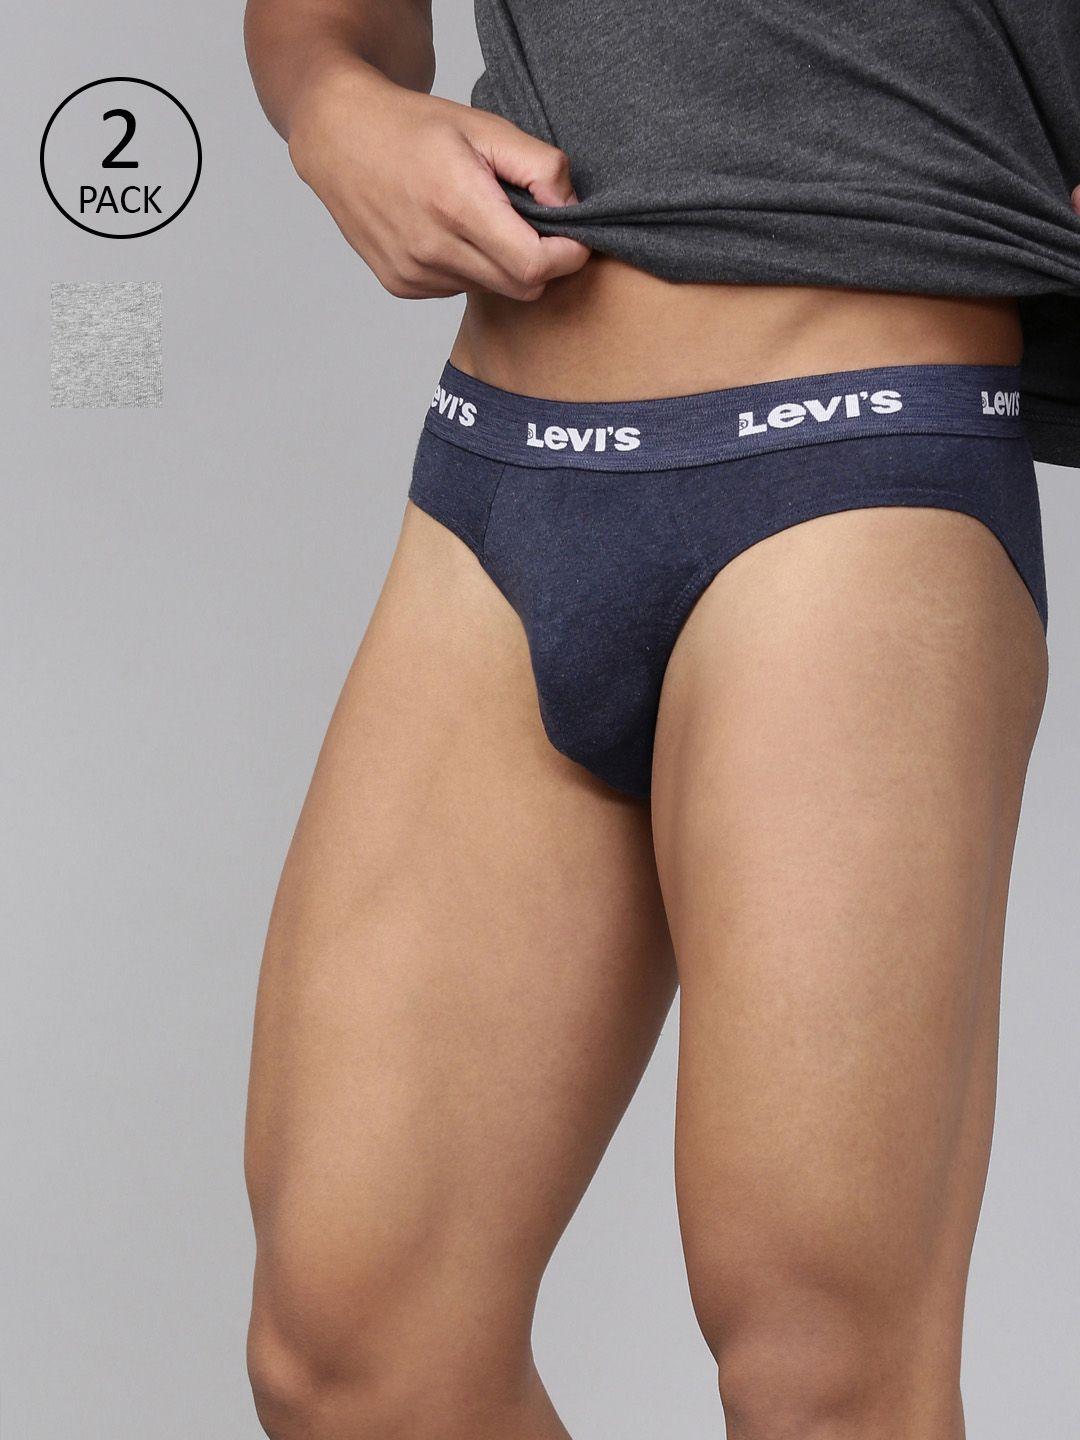 levis-pack-of-2-smartskin-technology-neo-briefs-with-tag-free-comfort-#009